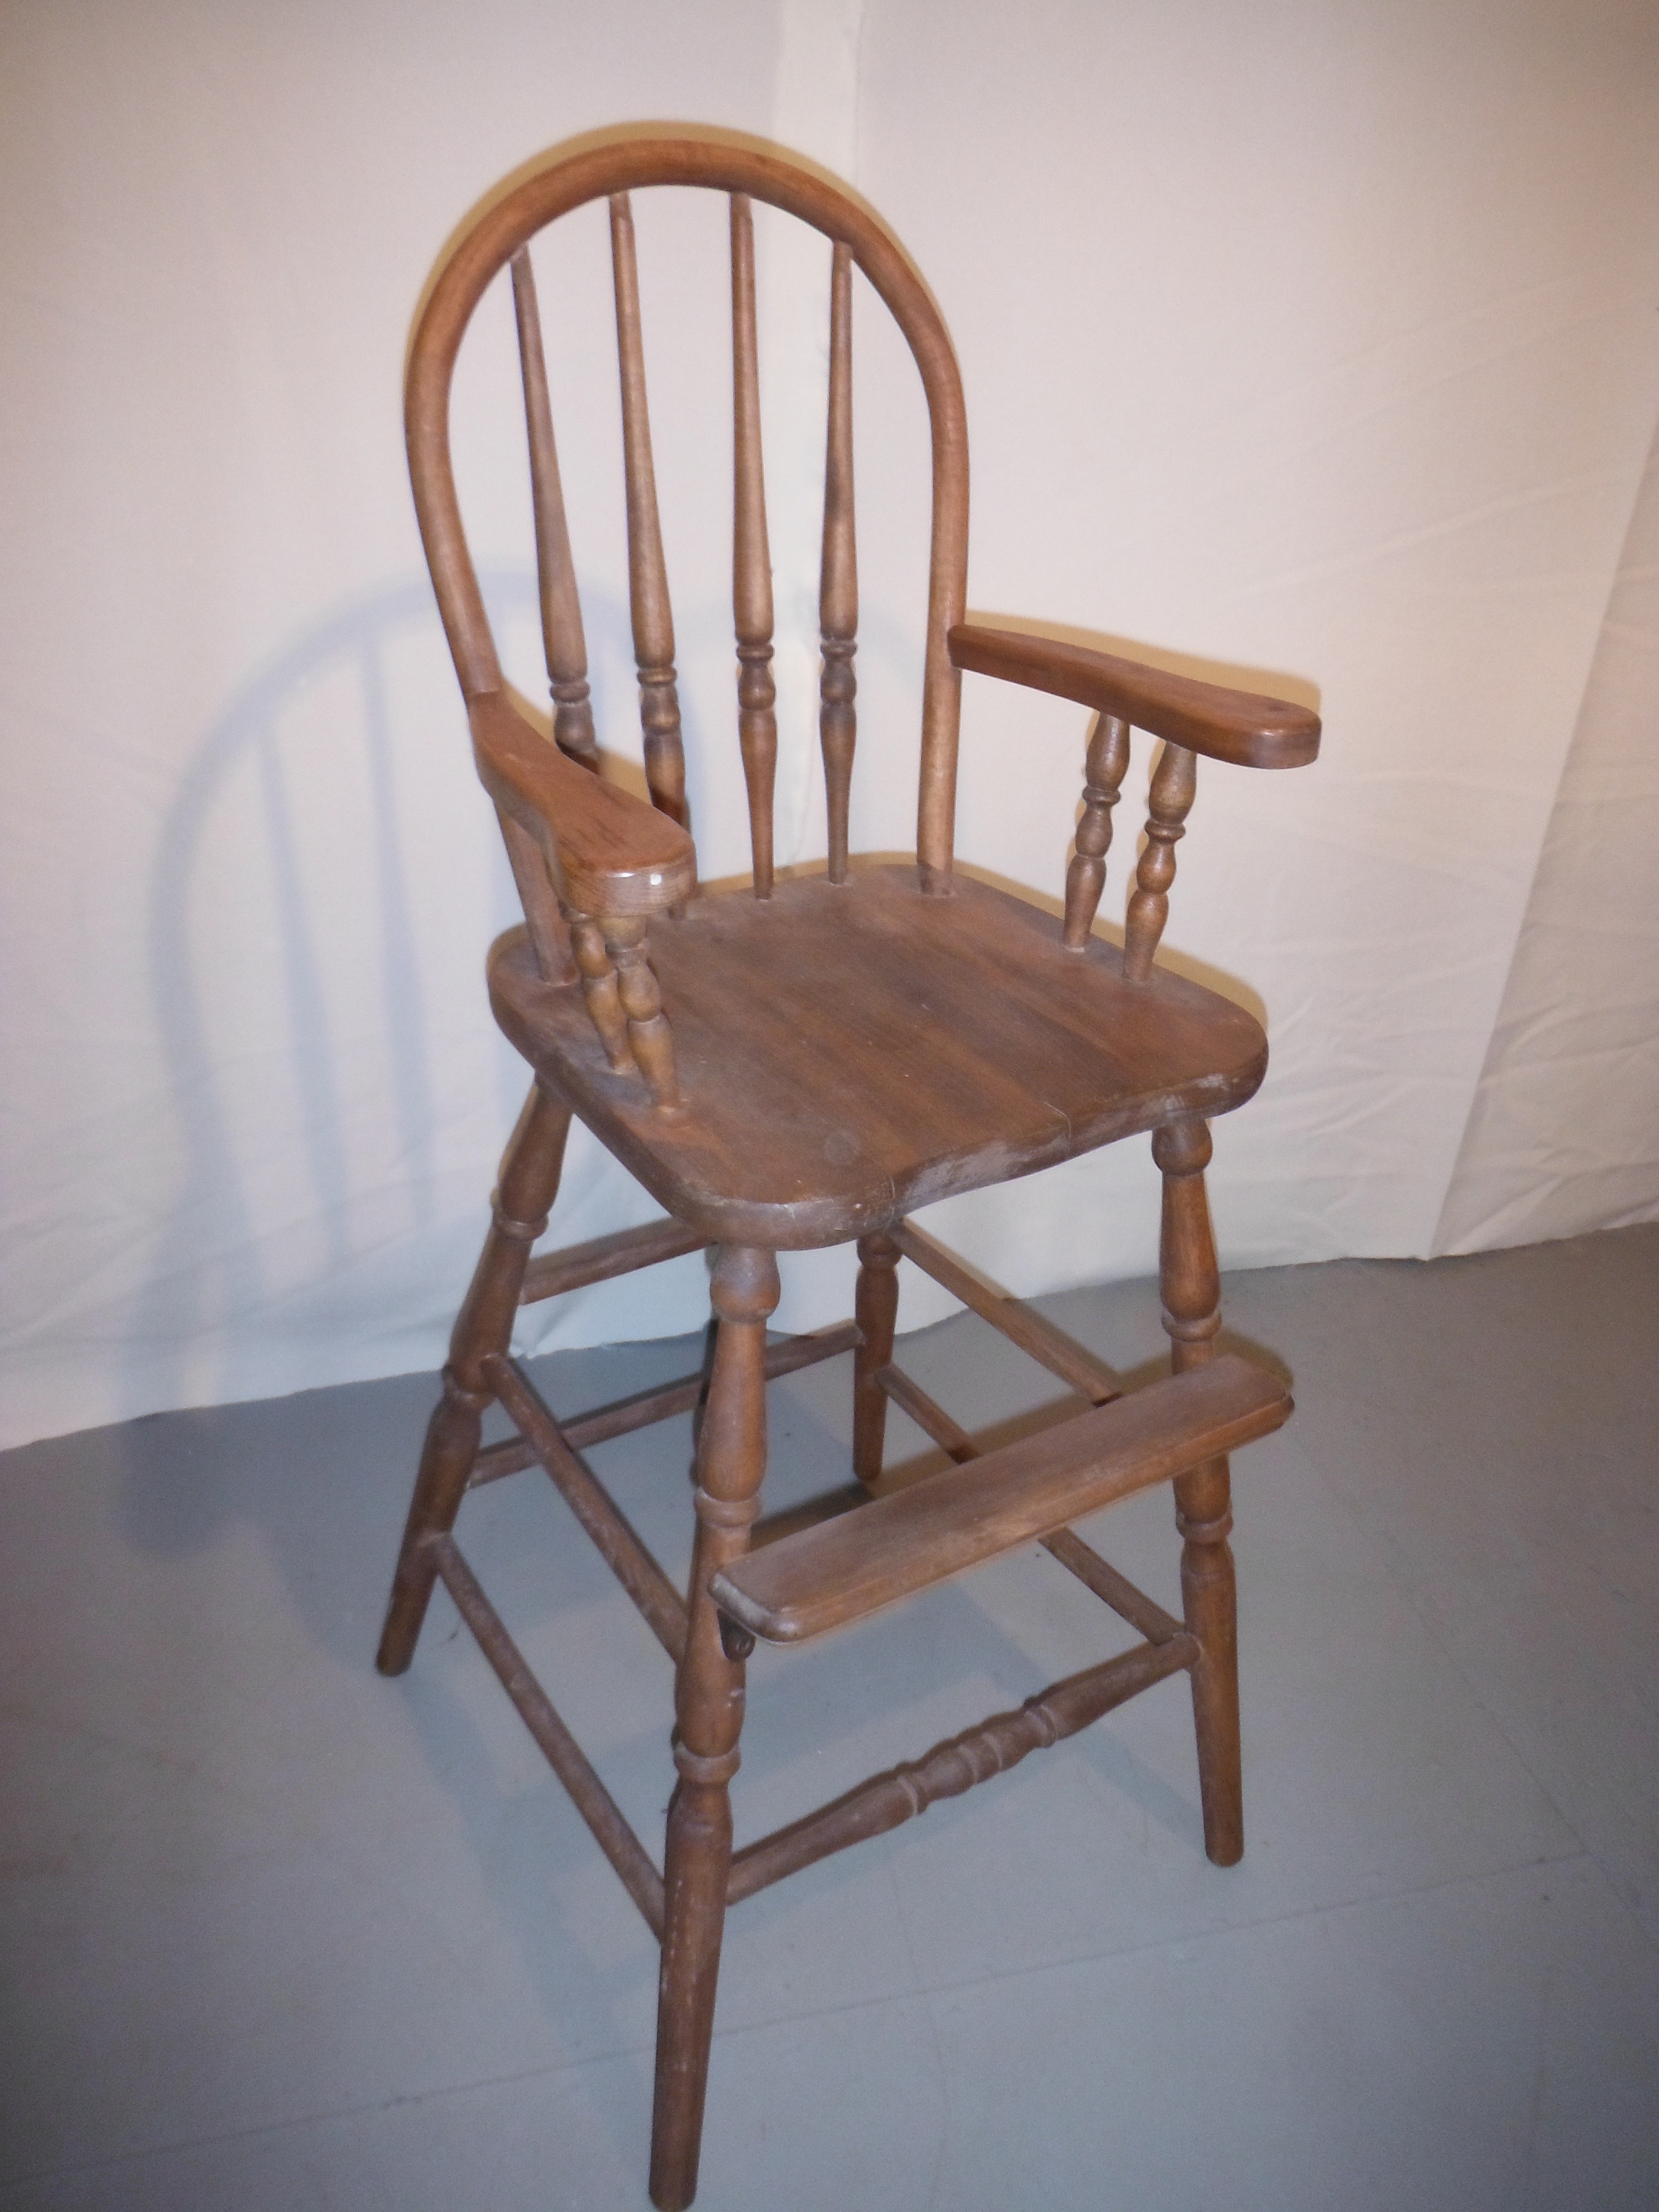 Sold Antique Oak Bent Wood High Chair Rescued Things